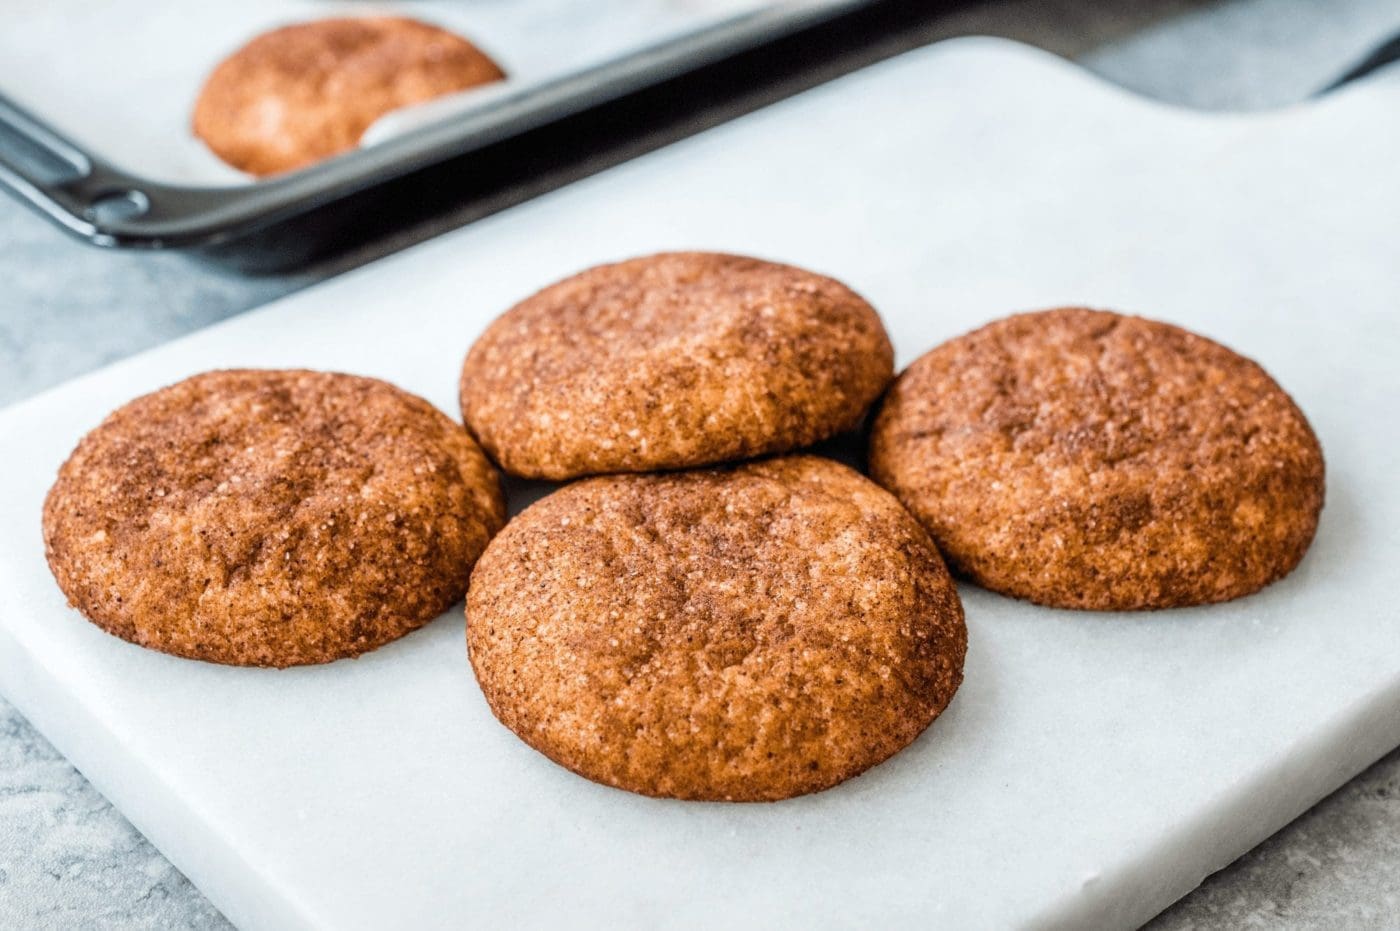 Snickerdoodles can be cannabis cookies too